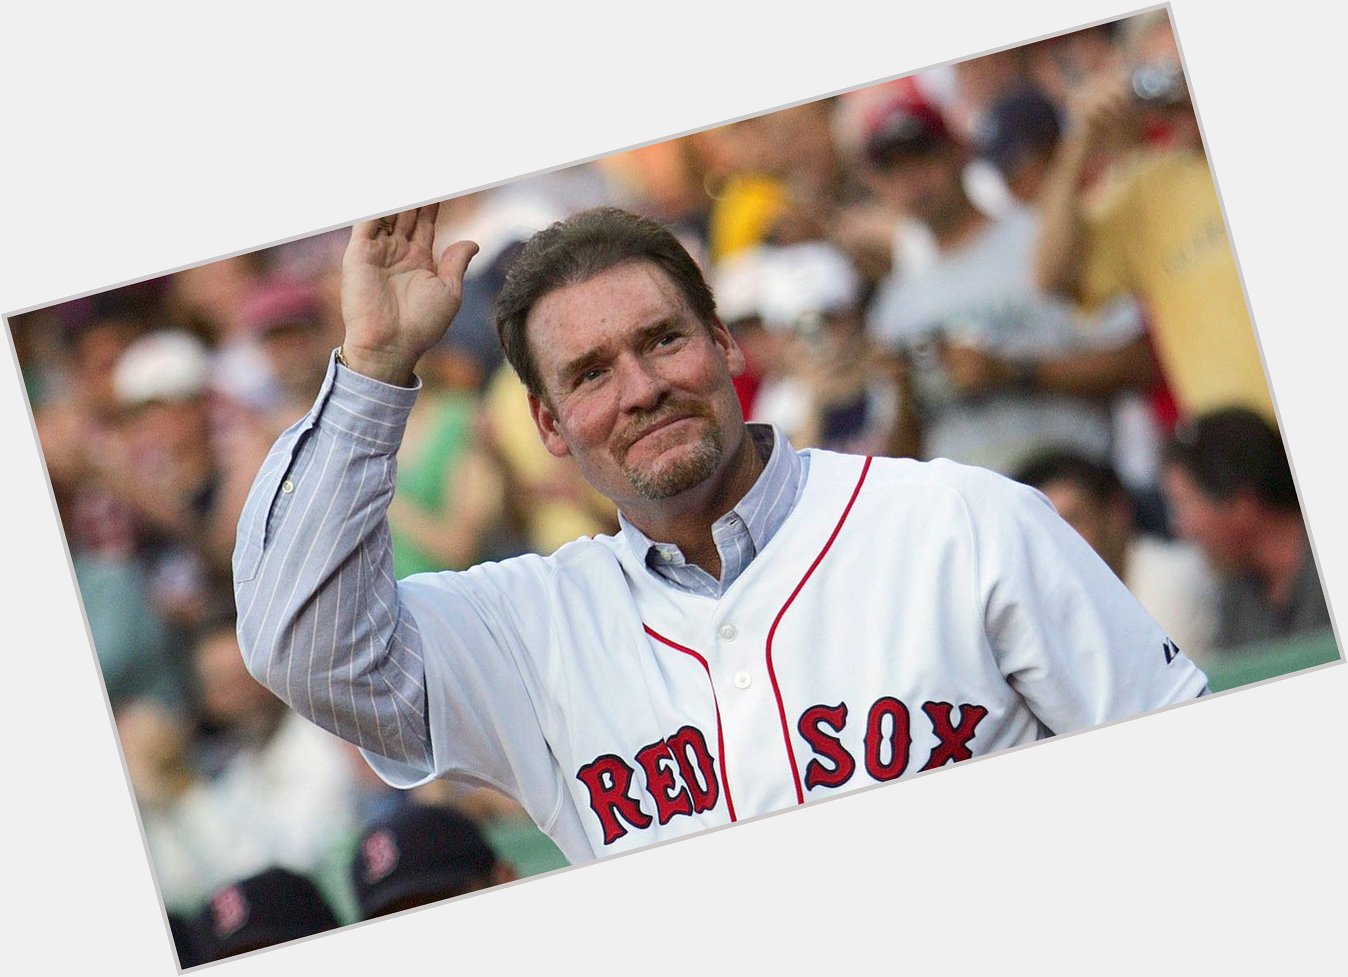 Happy Birthday to iconic baseball HOF member Wade Boggs, who celebrates his 59th birthday today!  